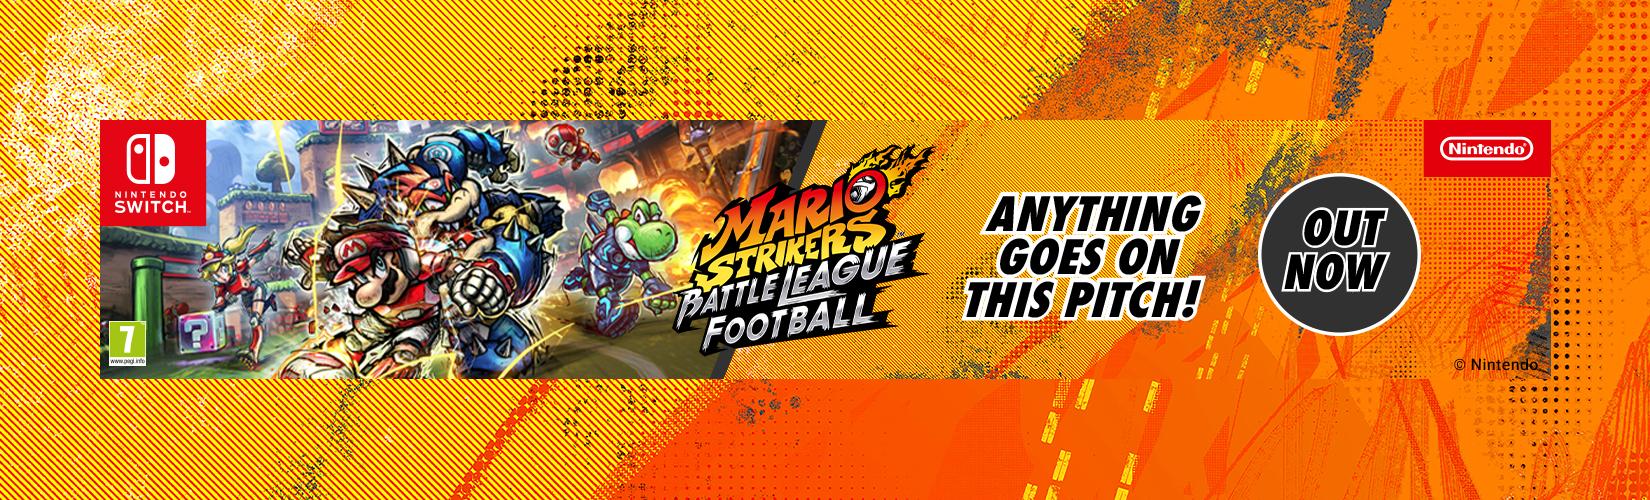 Mario strikers battle league football. Anything goes on this pitch! Out Now.